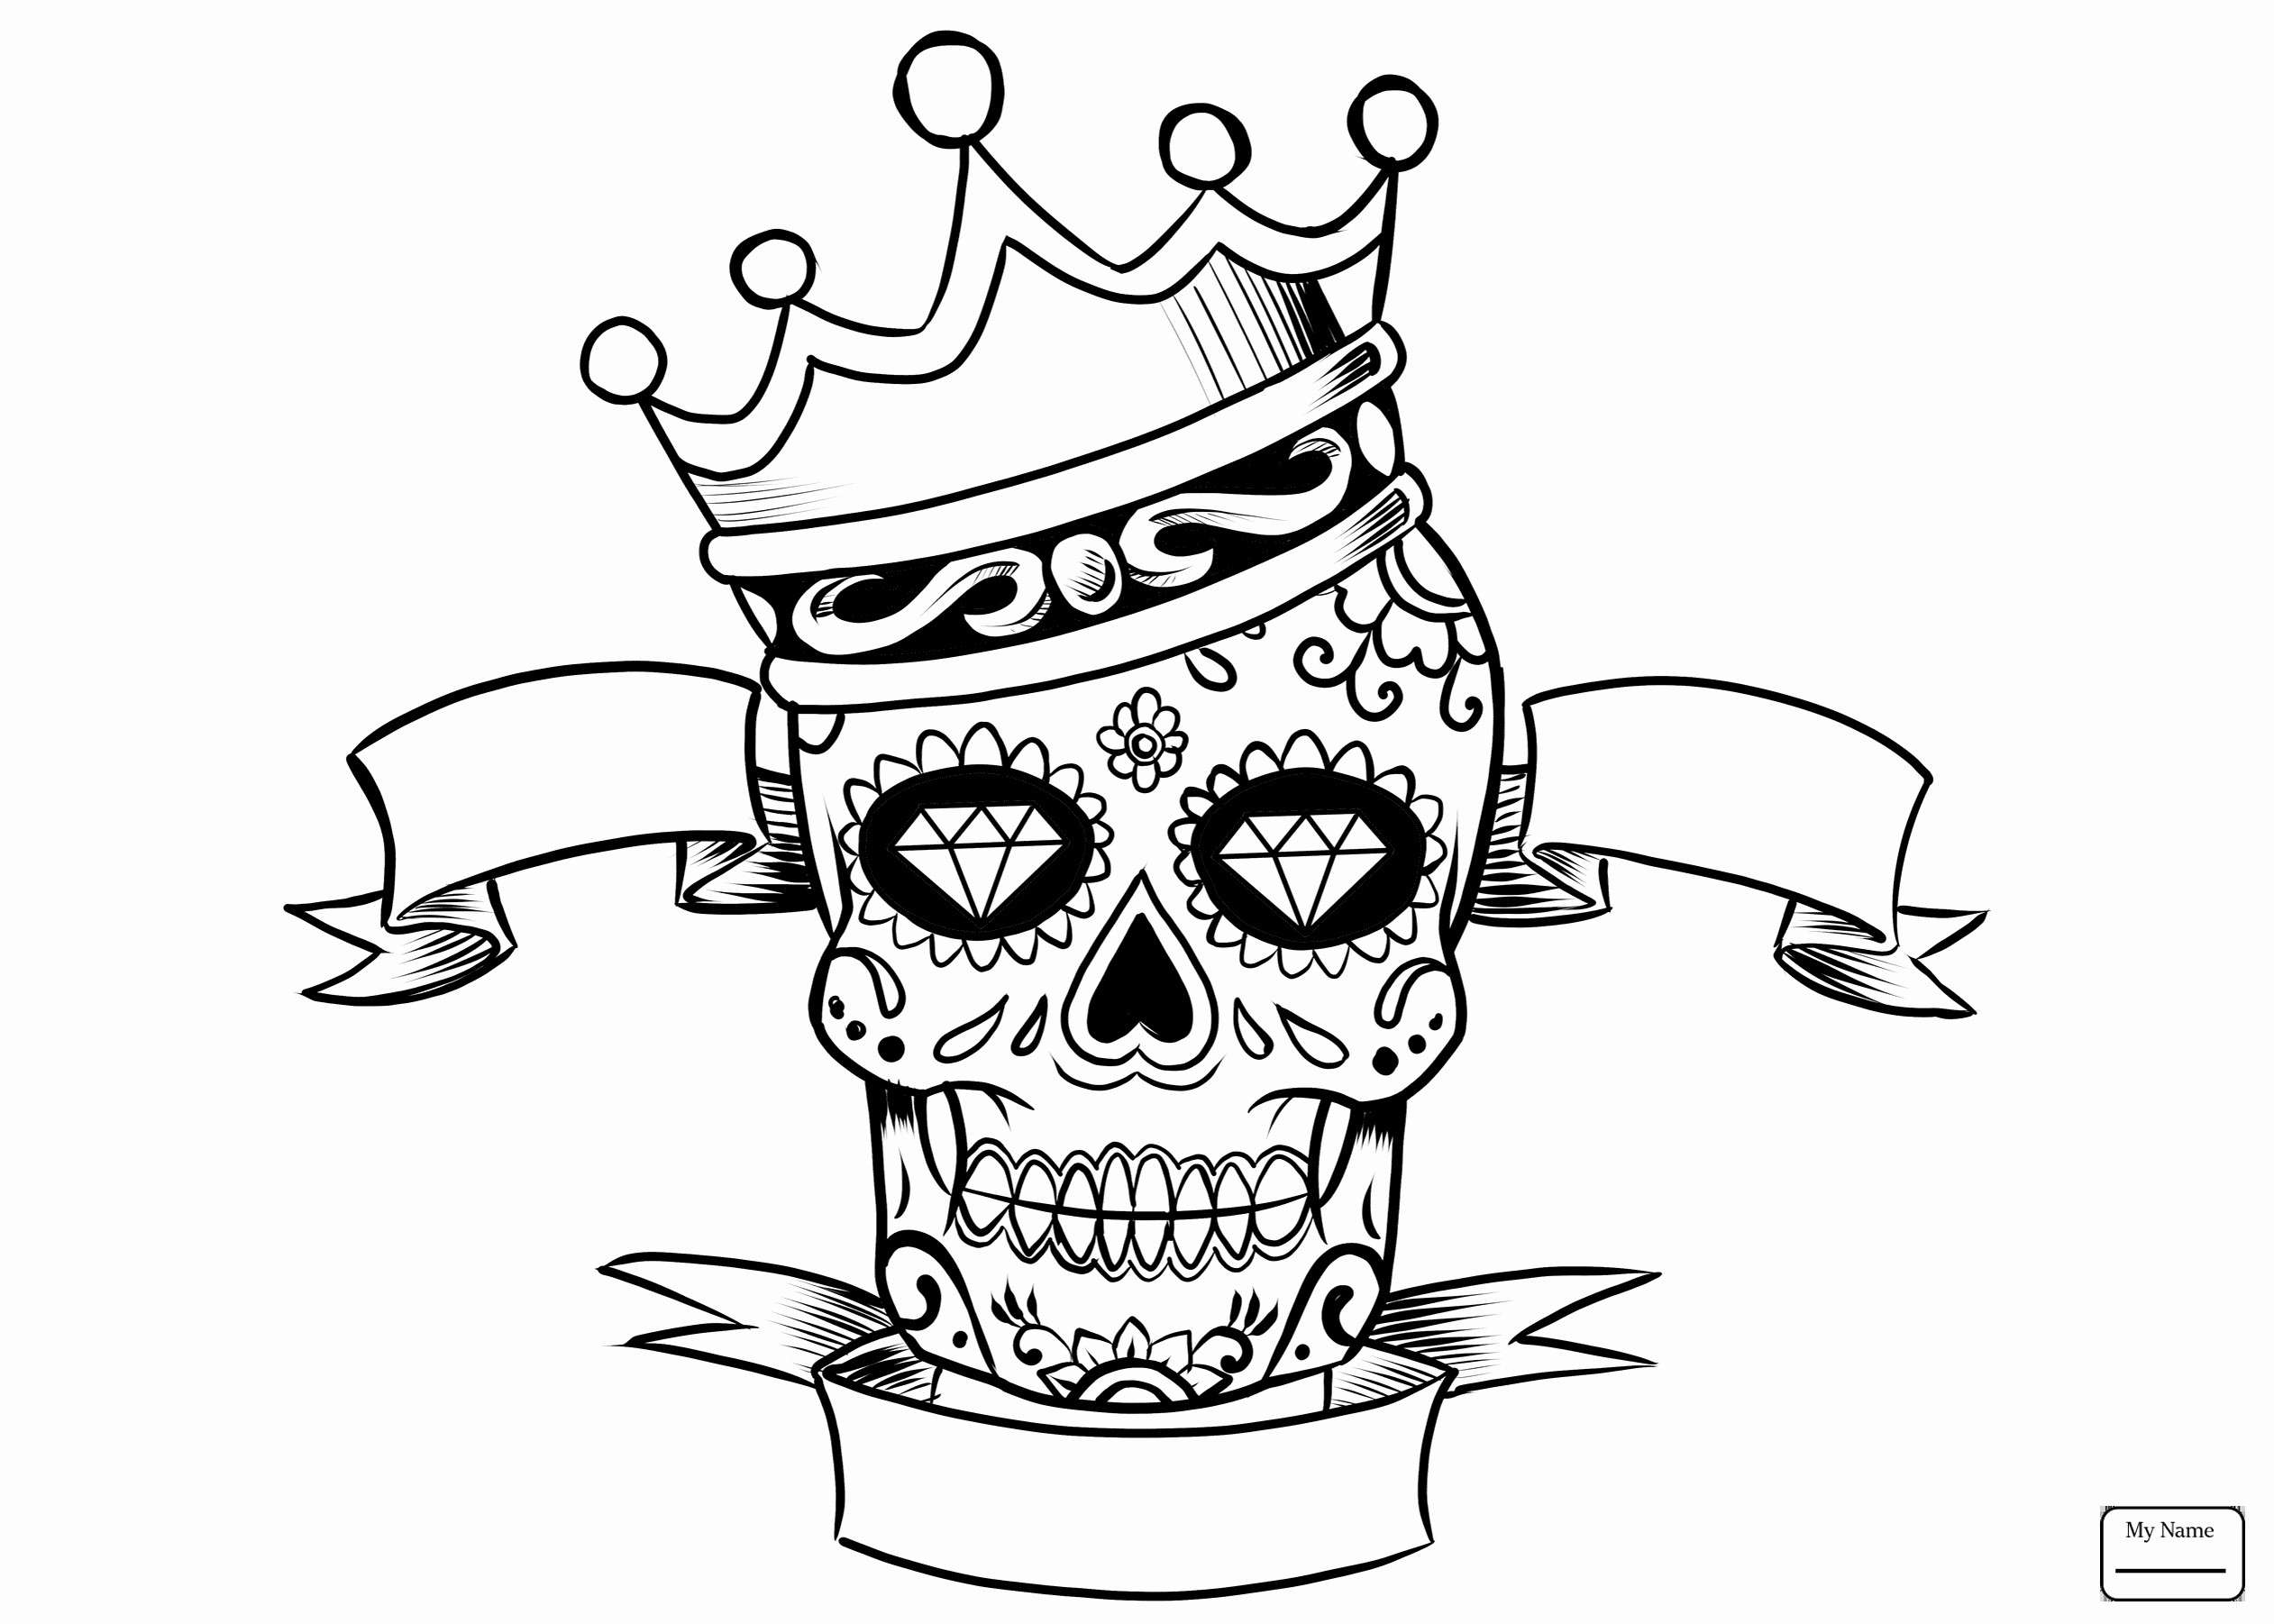 skull-coloring-pages-for-adults-best-coloring-pages-for-kids